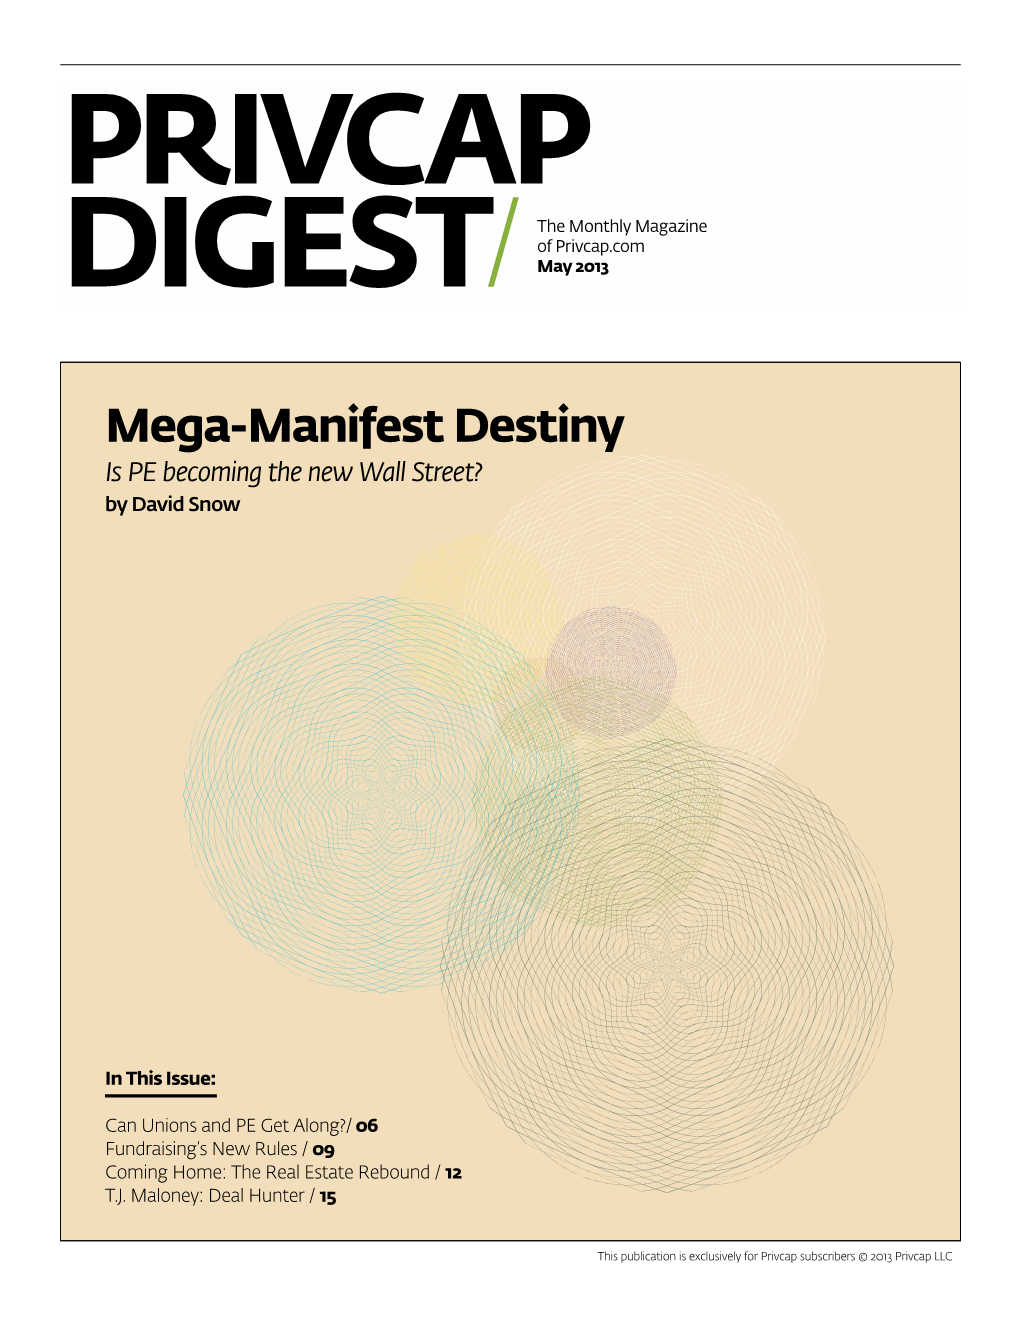 Mega-Manifest Destiny Is PE Becoming the New Wall Street? by David Snow